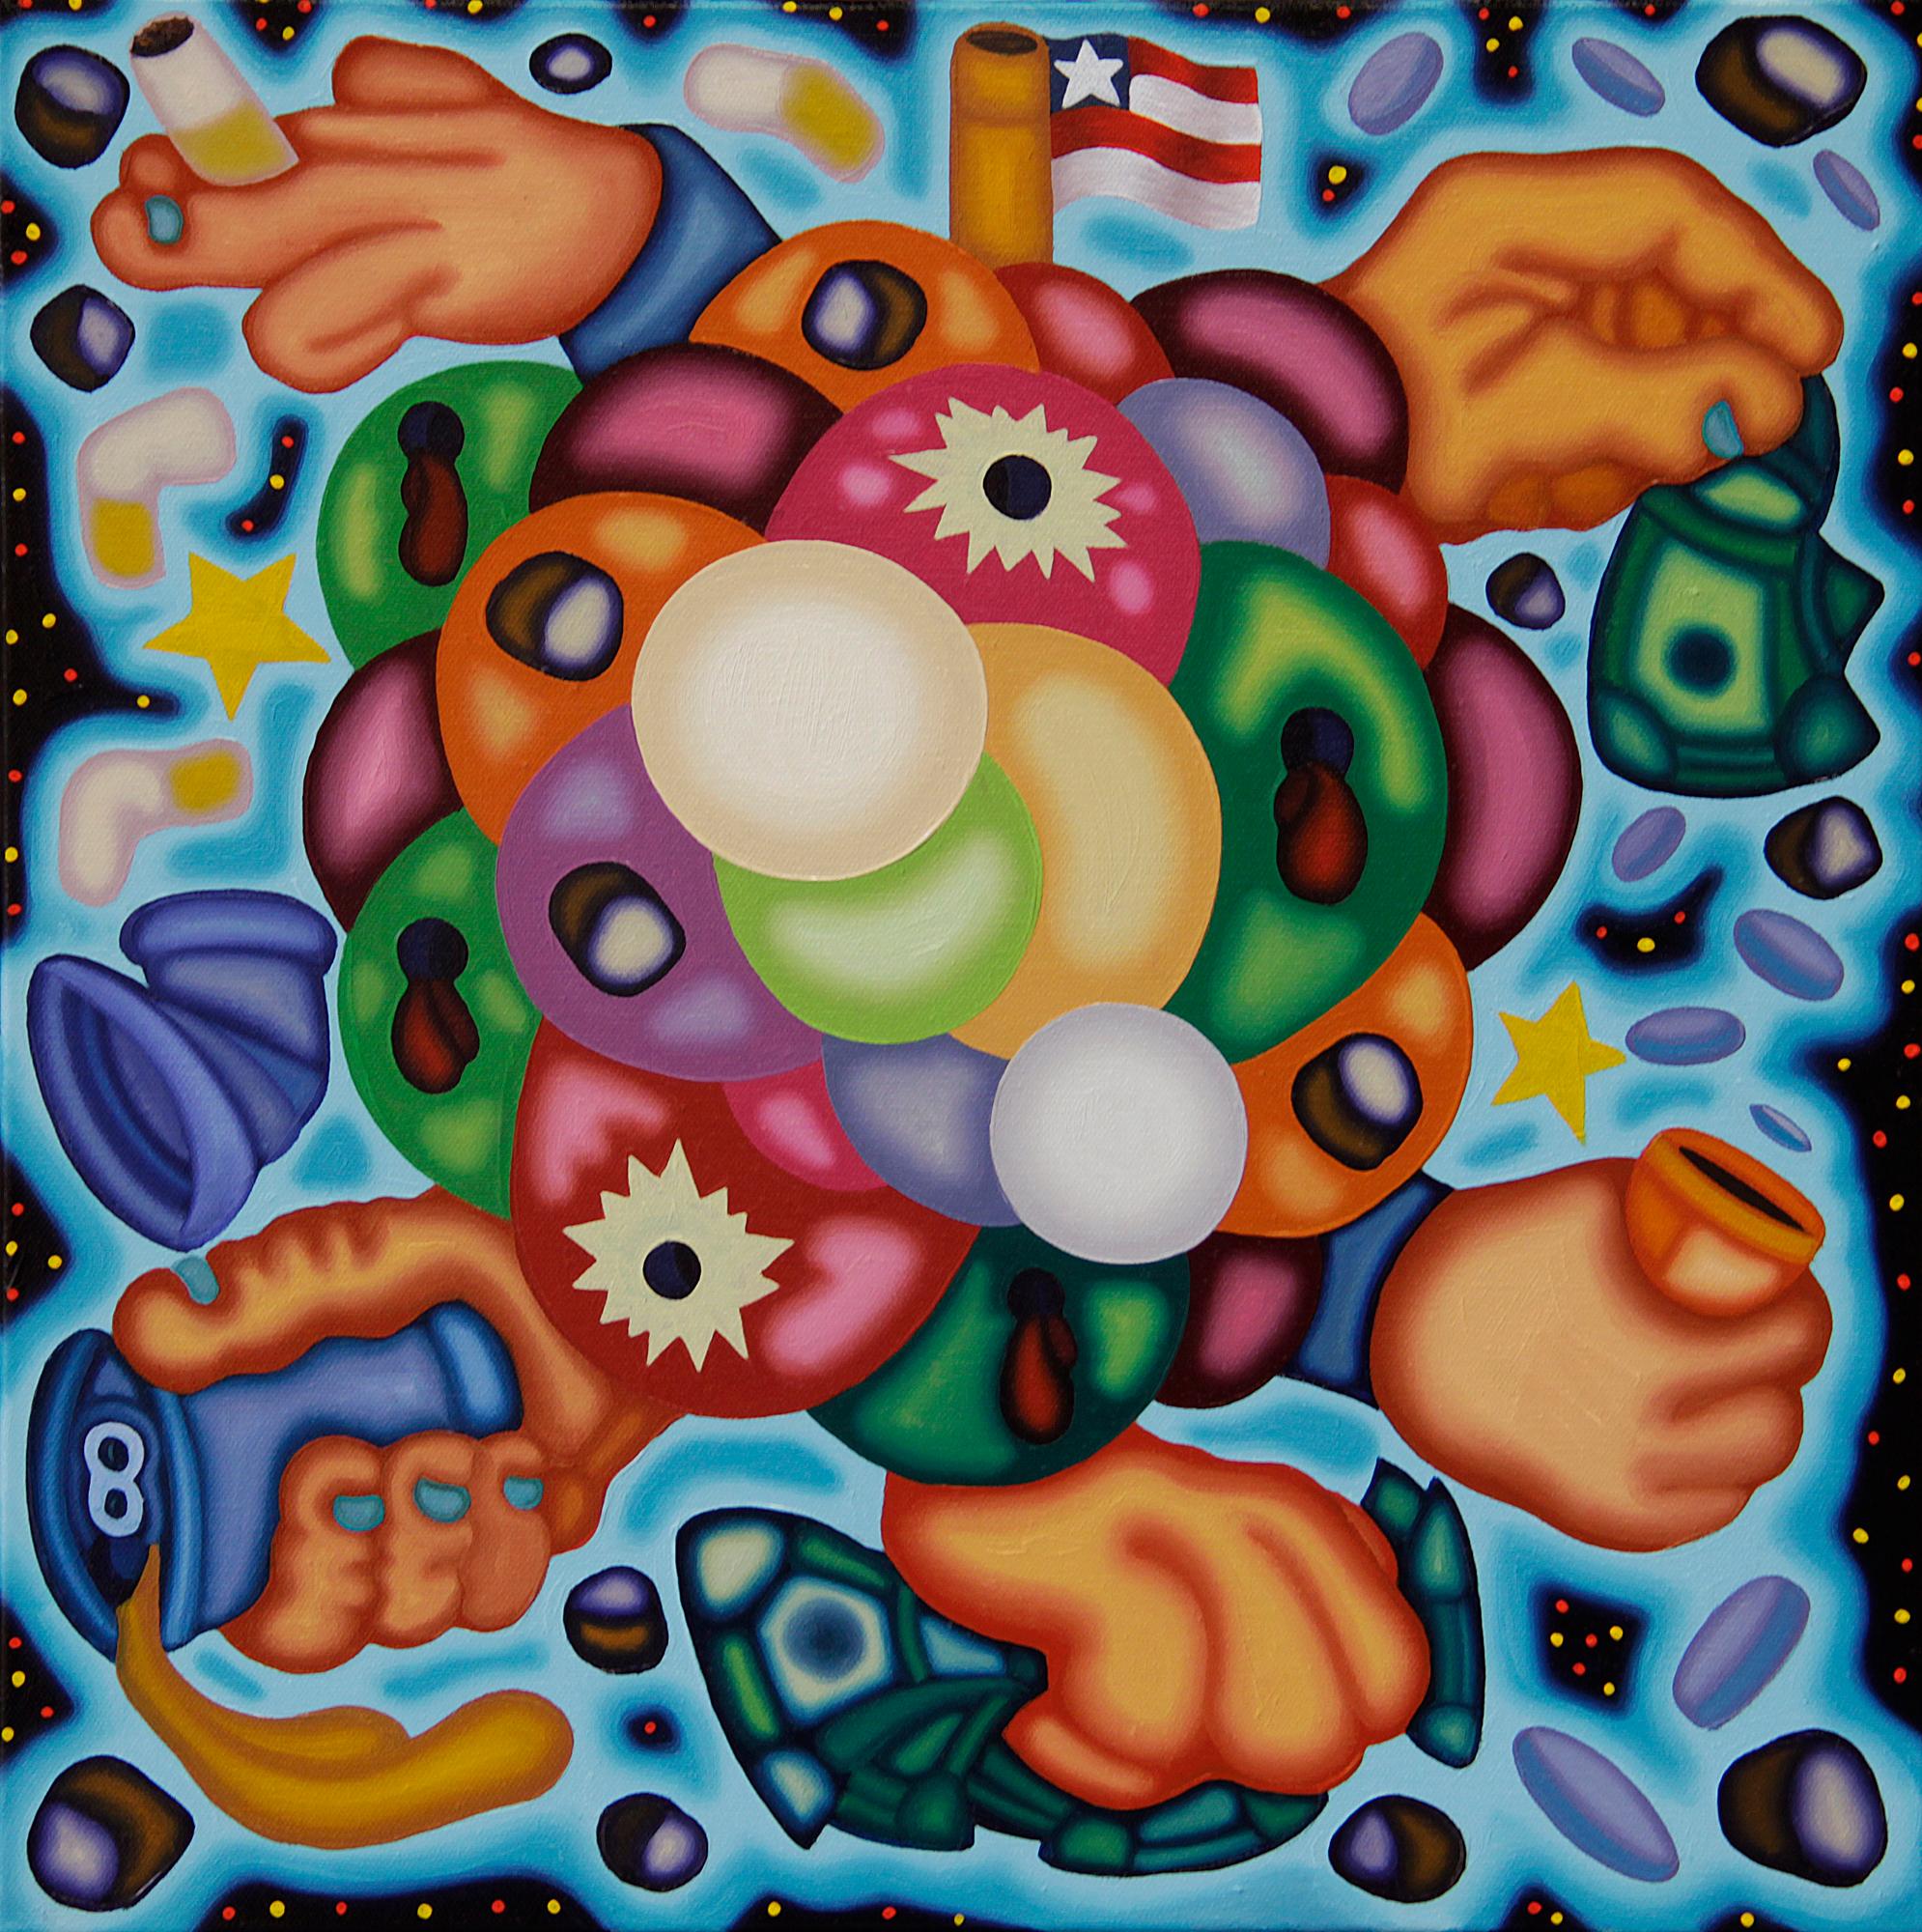 Tougher Pills to Swalla - Bold, Surrealist, Cubist Illustrative Oil Painting